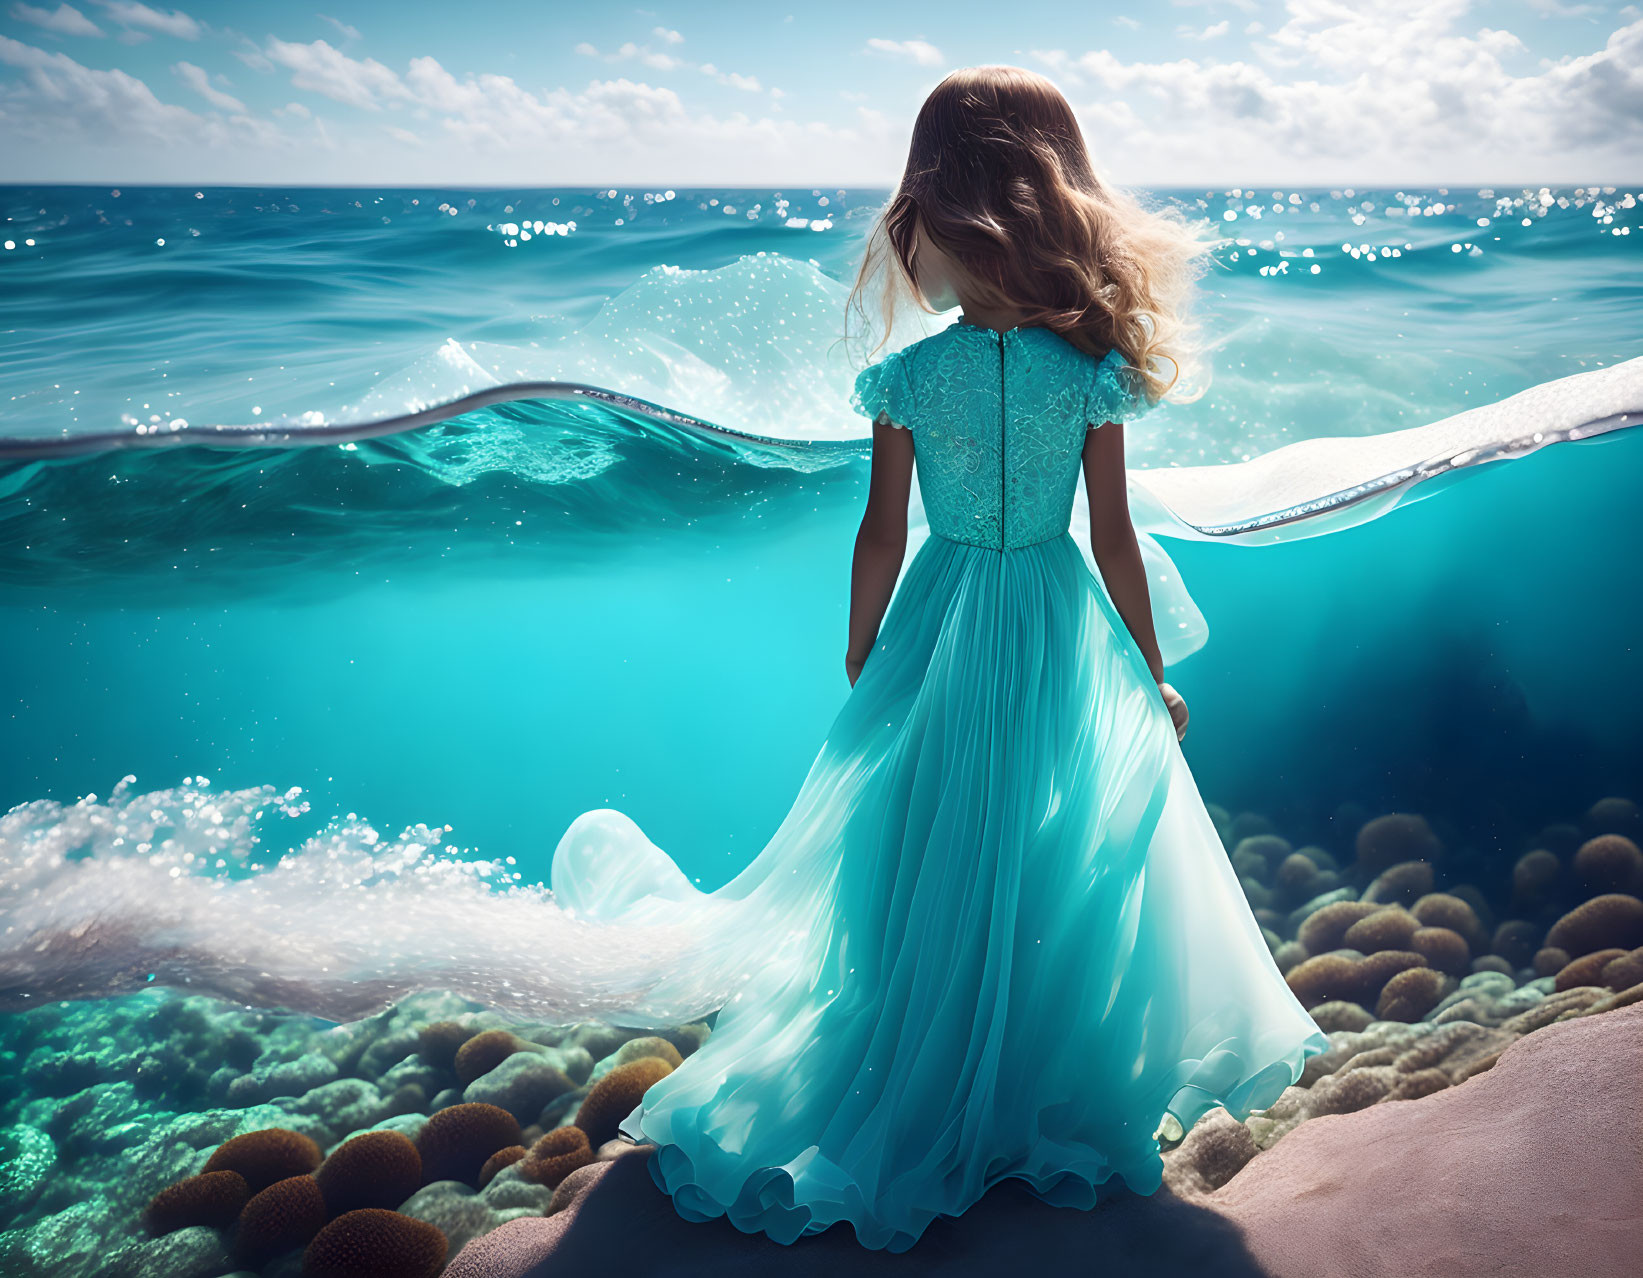 Girl in flowing turquoise dress by surreal sea with undulating waves and coral.